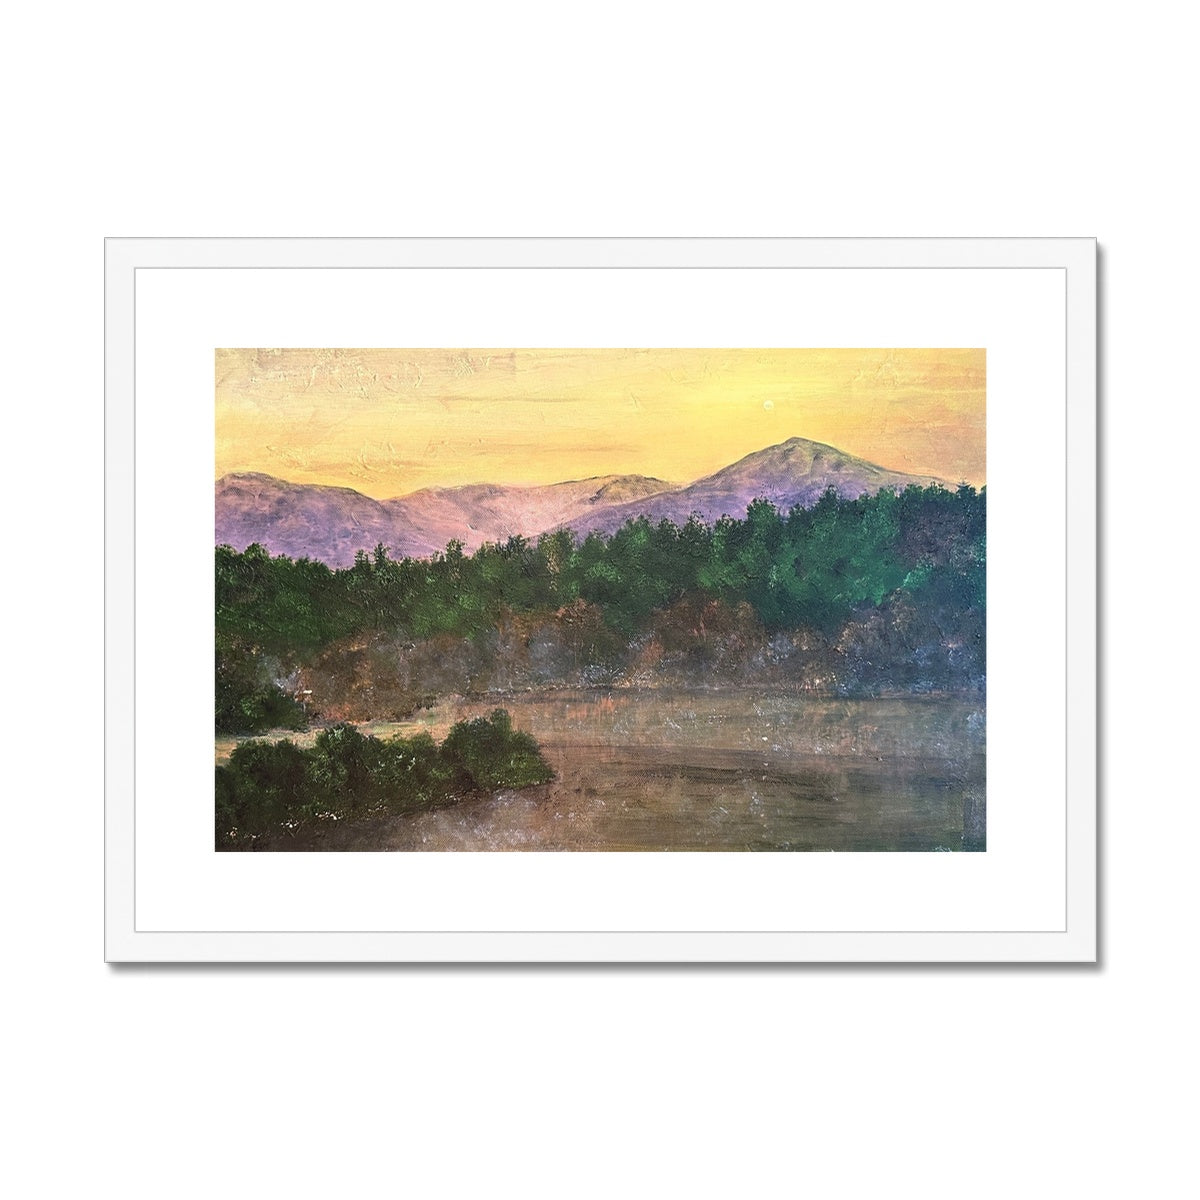 Ben Tee Invergarry Painting | Framed & Mounted Prints From Scotland-Framed & Mounted Prints-Scottish Lochs & Mountains Art Gallery-A2 Landscape-White Frame-Paintings, Prints, Homeware, Art Gifts From Scotland By Scottish Artist Kevin Hunter